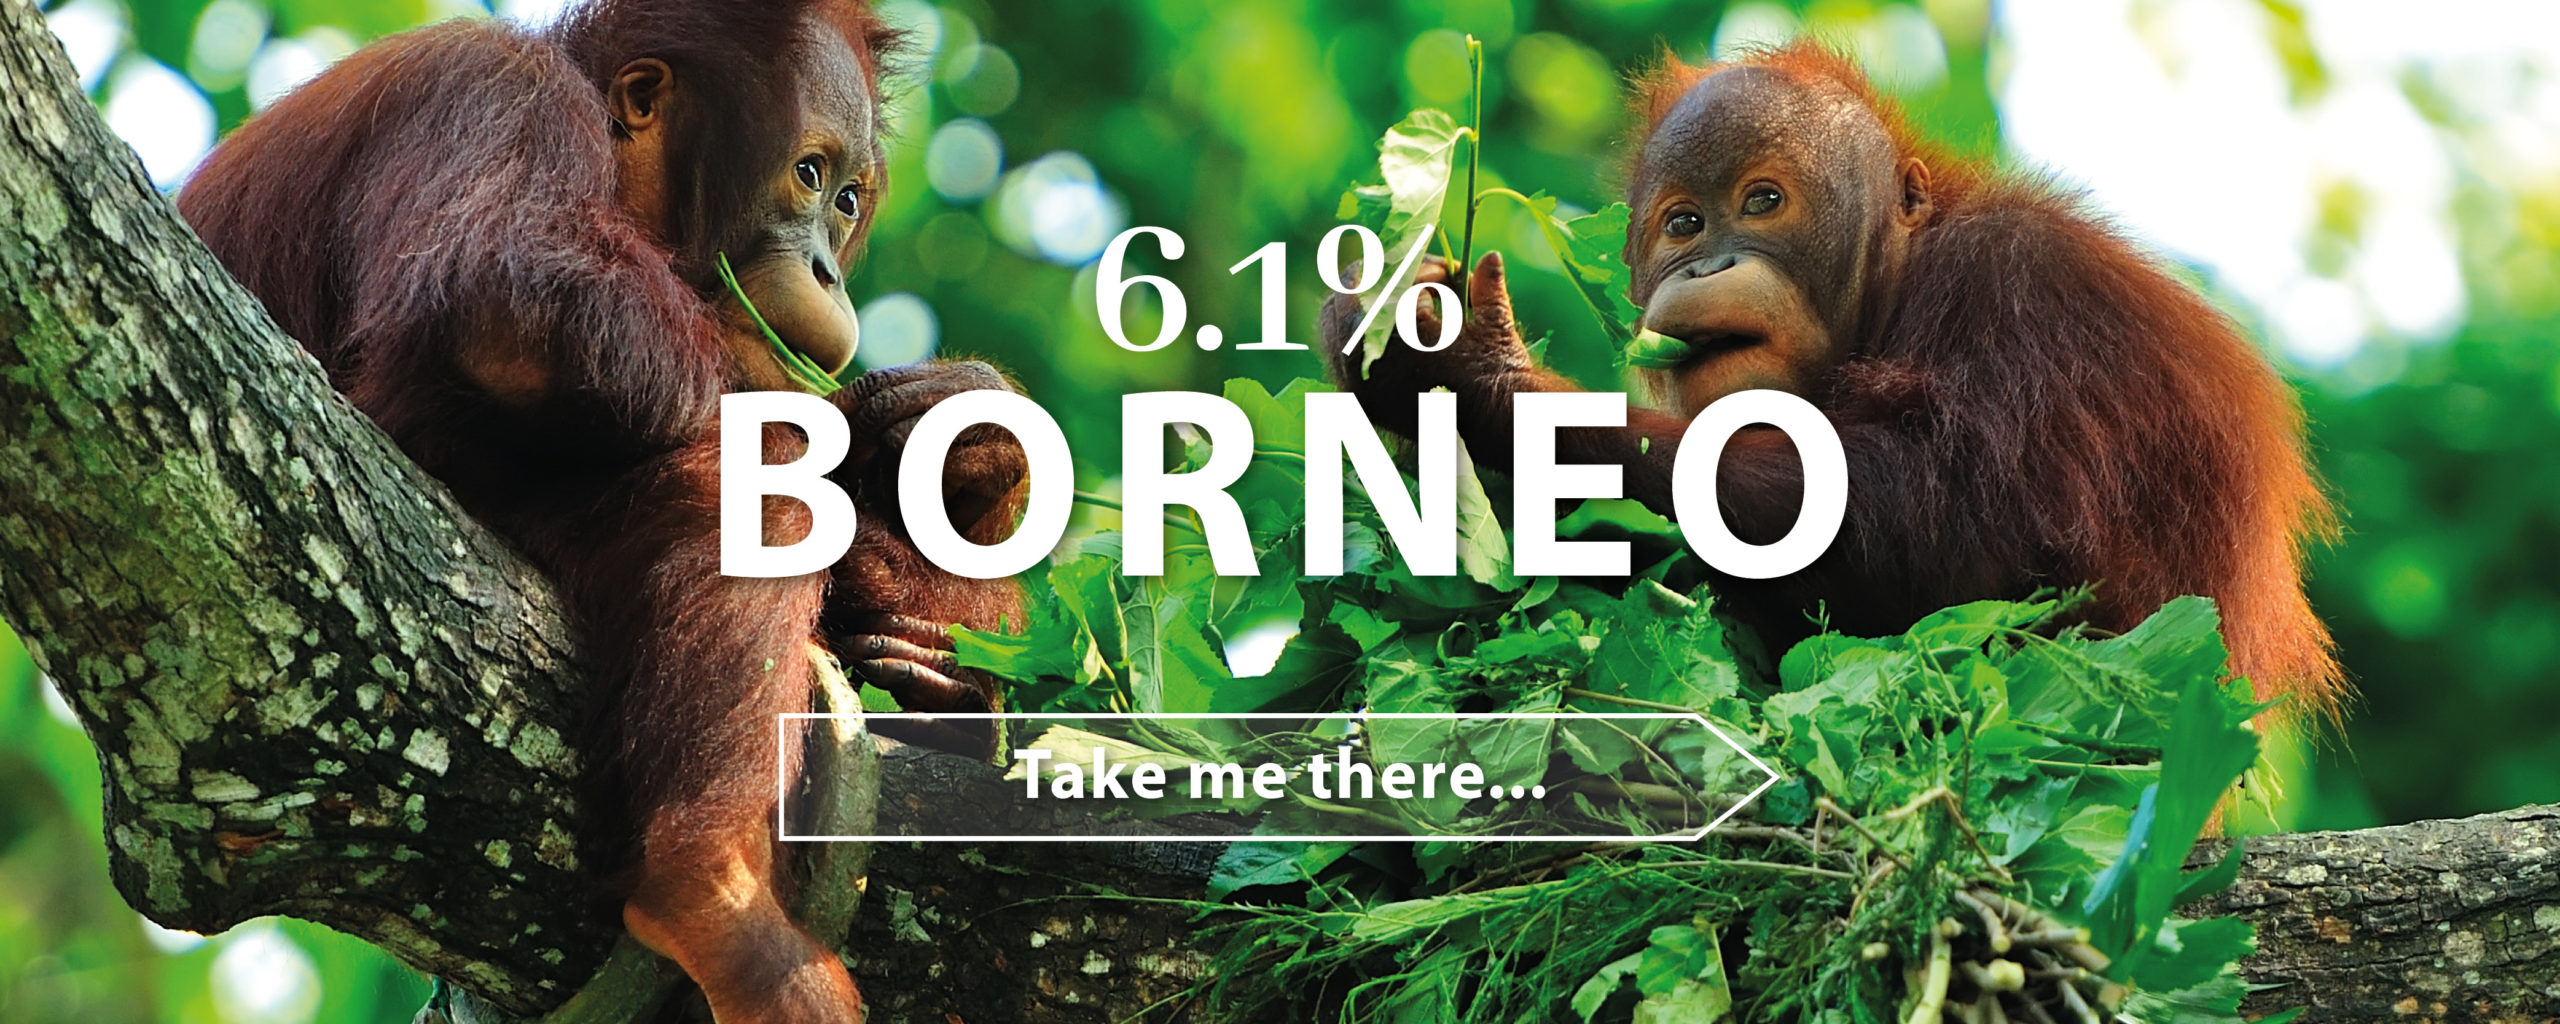 Where youre going this year_Borneo